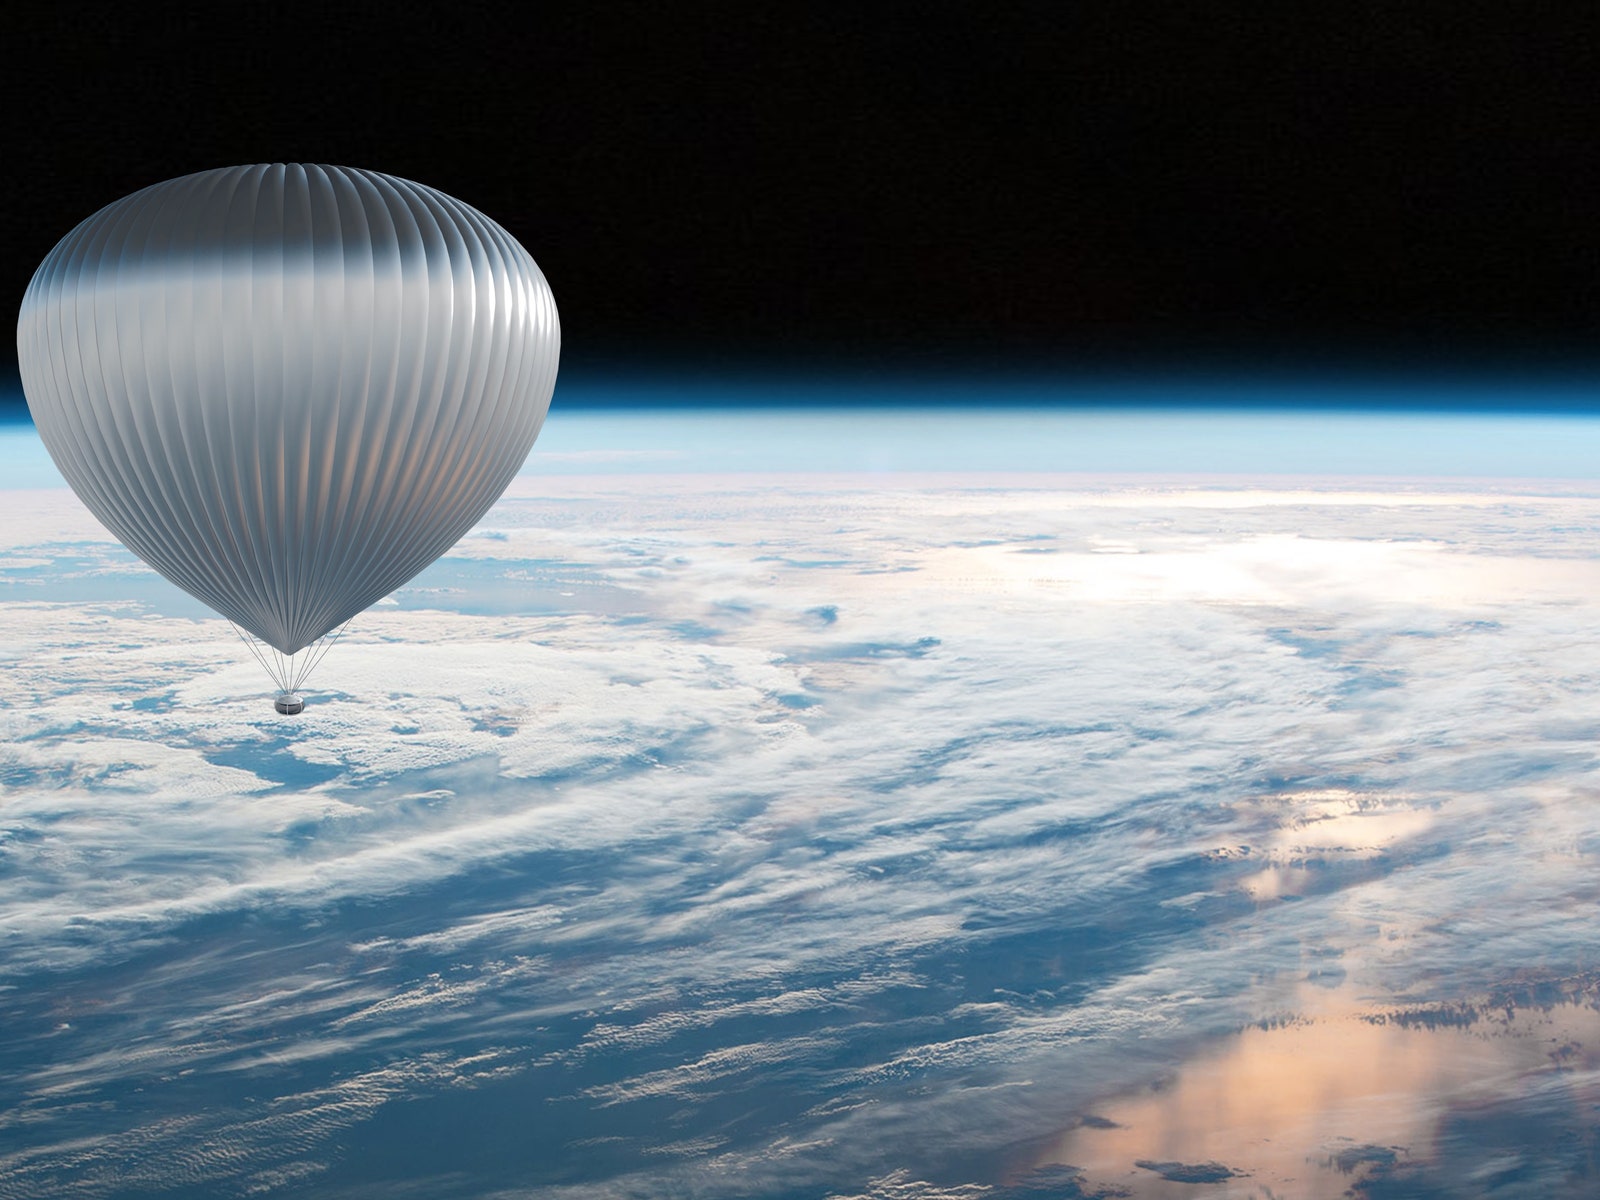 You Can Book a Hot Air Balloon Ride to the Edge of Space in 2024 for $133,000